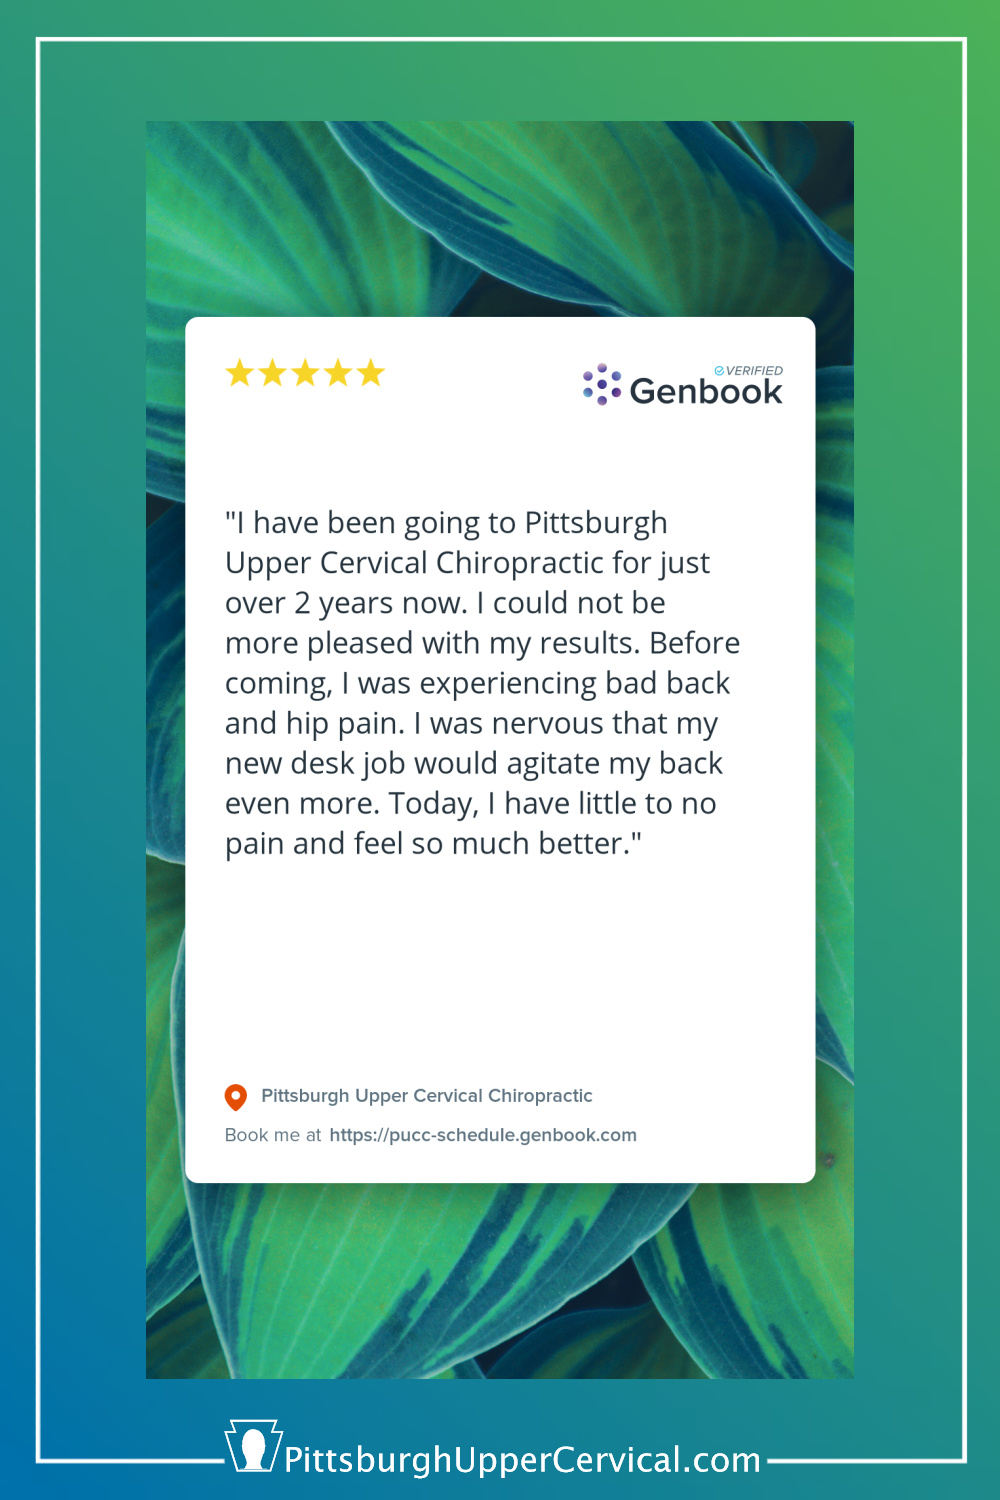 Woman Gets Help for Back and Hip Pain at Pittsburgh Upper Cervical Chiropractic Pinterest Pin